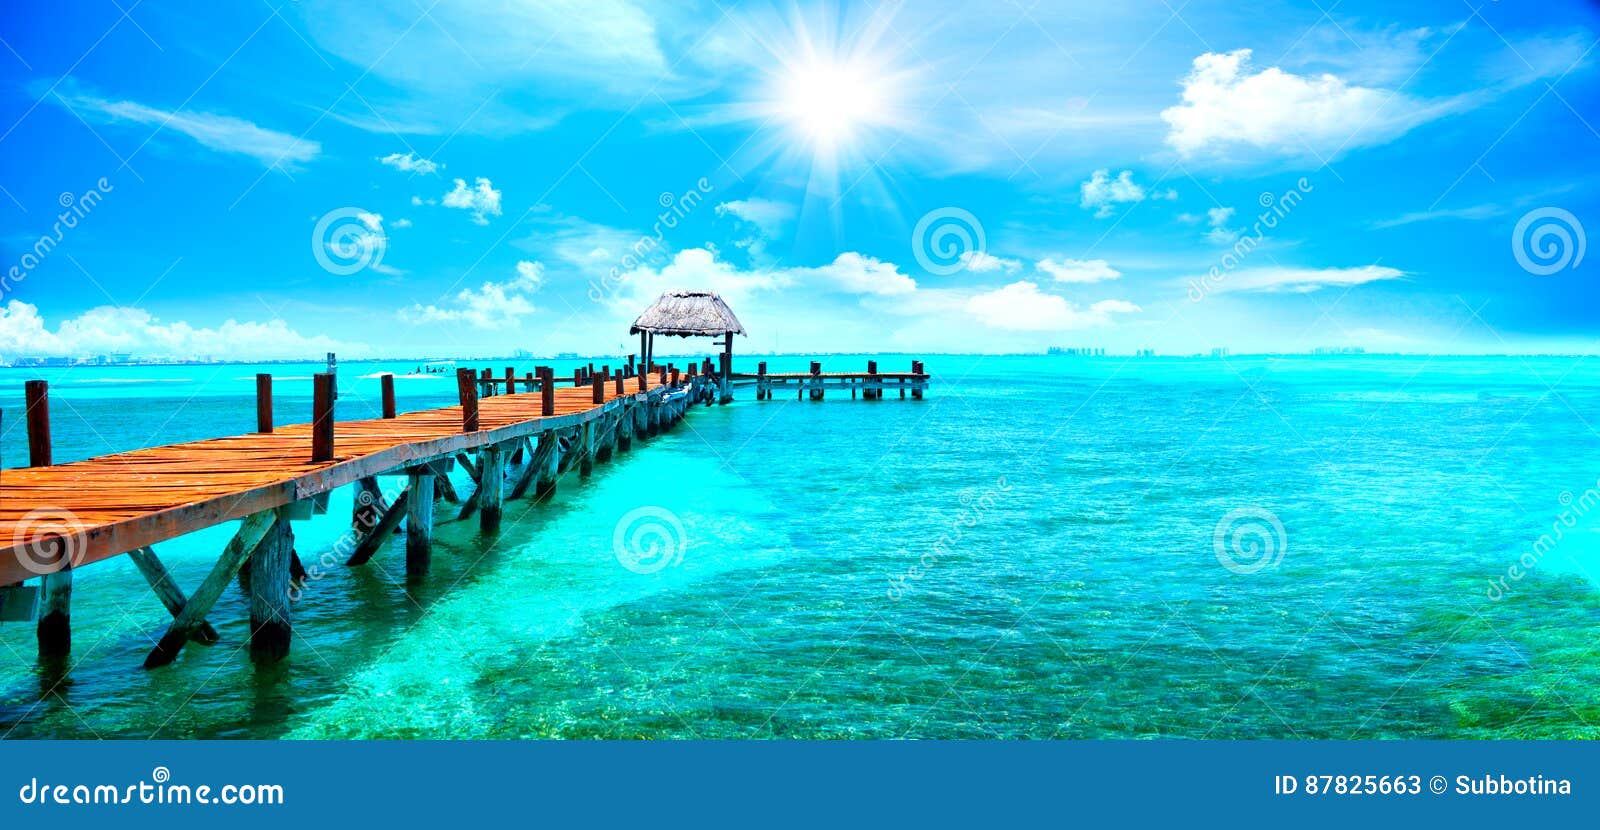 exotic tropical resort. jetty near cancun, mexico. travel and vacations concept